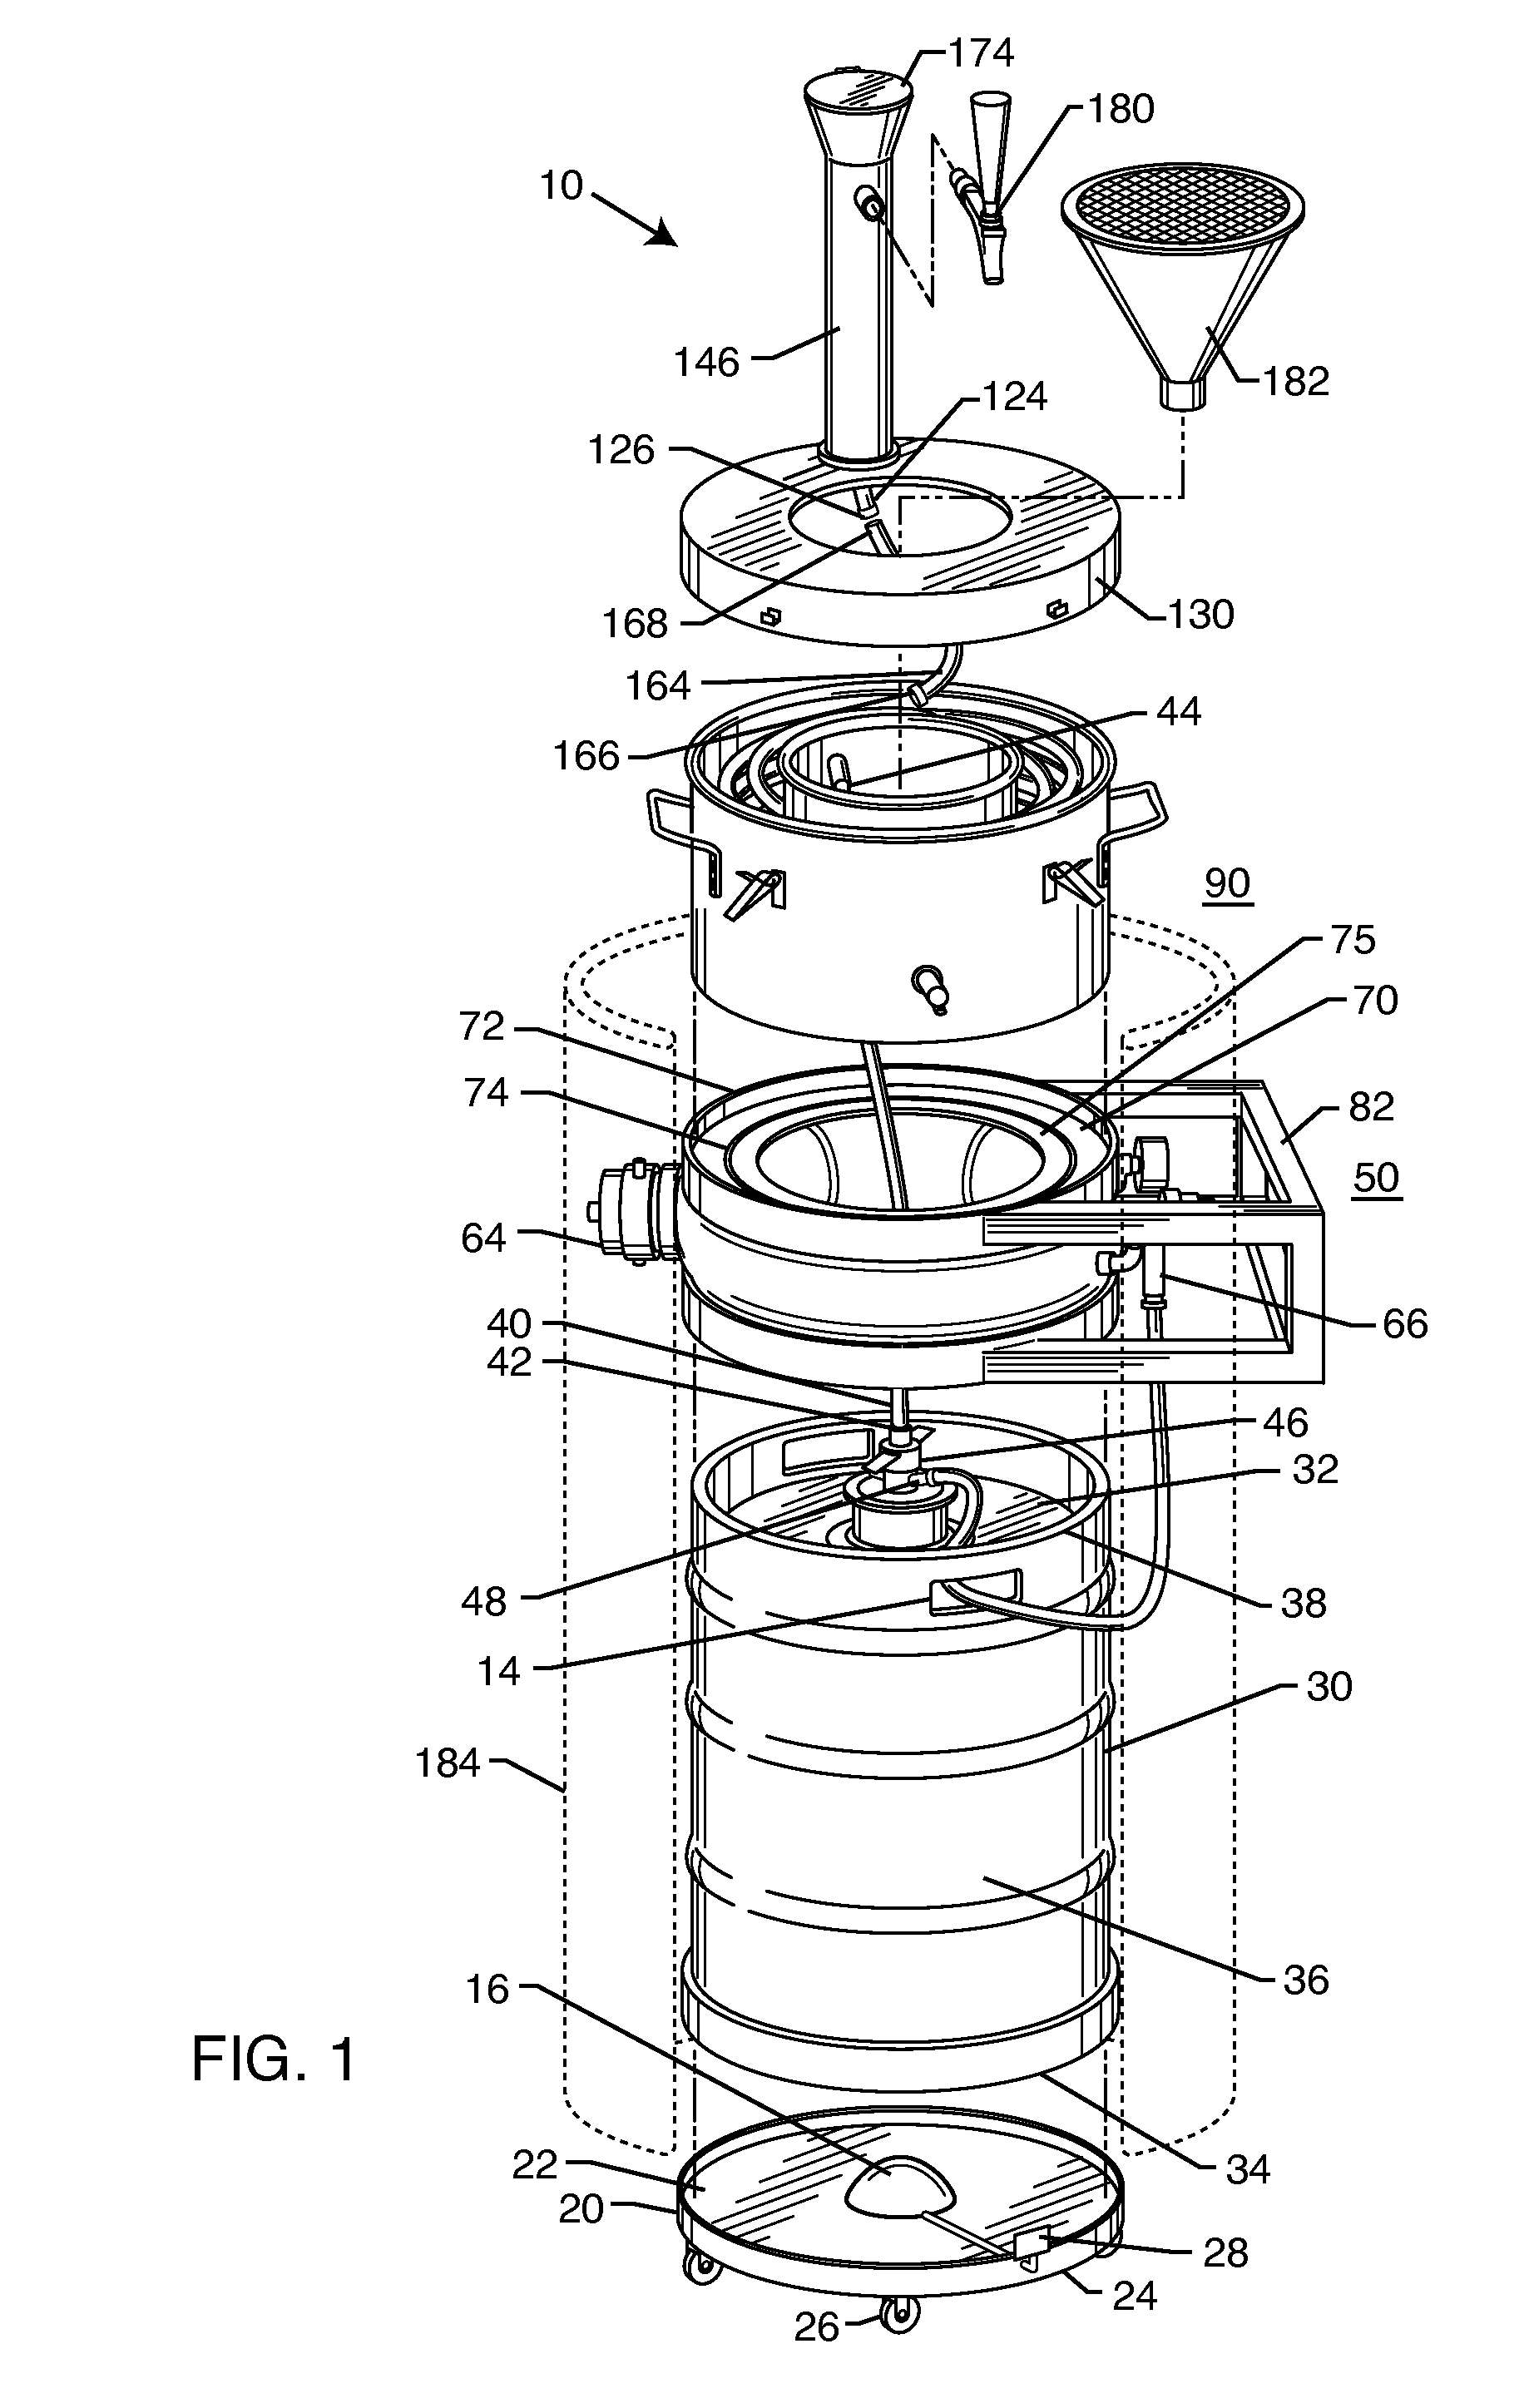 Cooling, carbonation and dispensing system for a liquid in a keg